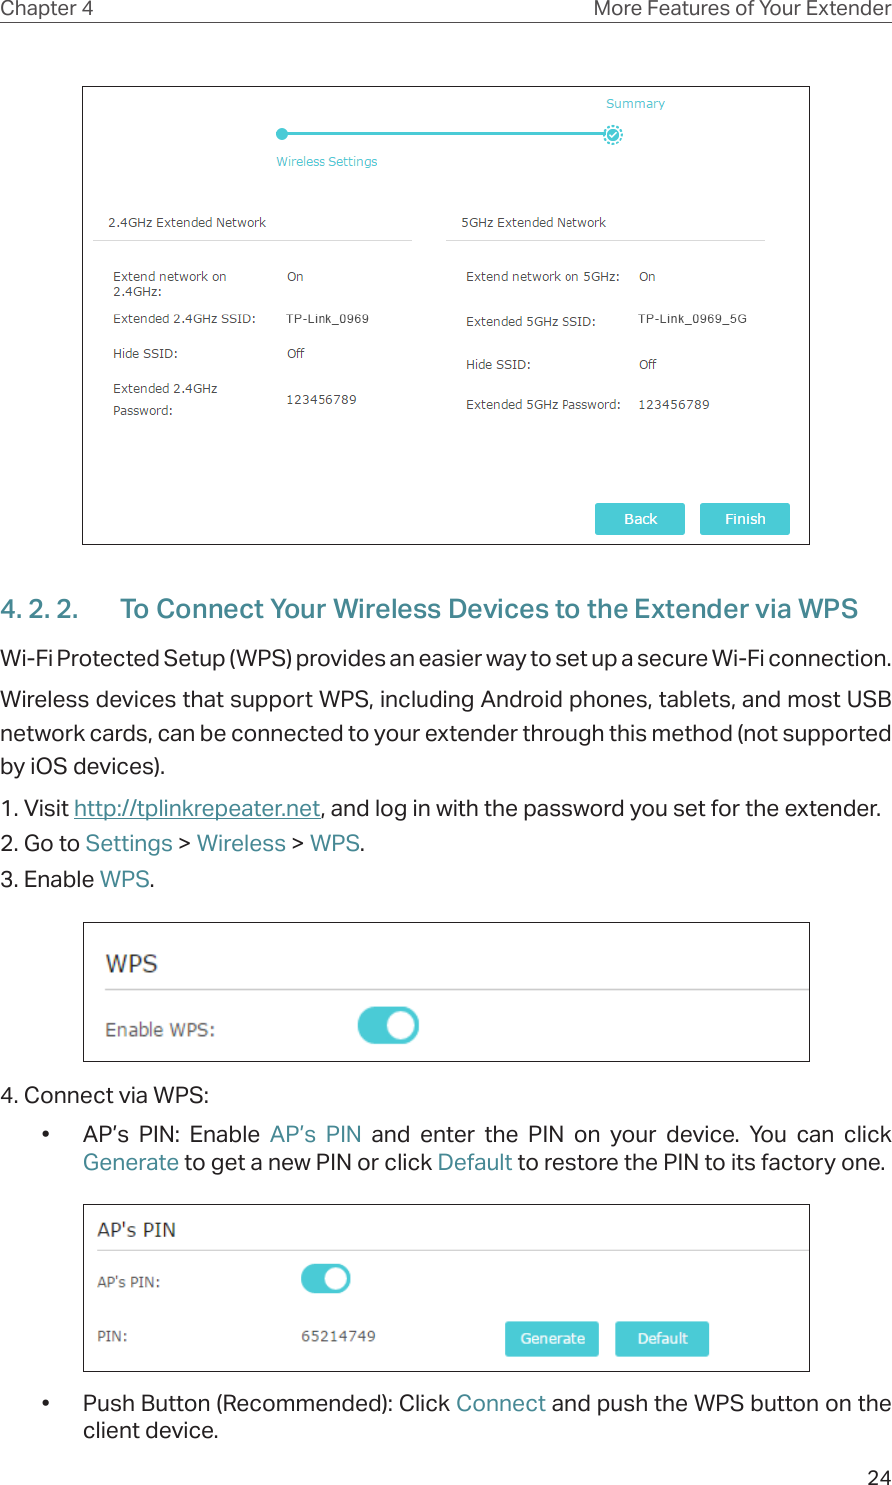 24Chapter 4 More Features of Your Extender4. 2. 2.  To Connect Your Wireless Devices to the Extender via WPSWi-Fi Protected Setup (WPS) provides an easier way to set up a secure Wi-Fi connection.Wireless devices that support WPS, including Android phones, tablets, and most USB network cards, can be connected to your extender through this method (not supported by iOS devices).1. Visit http://tplinkrepeater.net, and log in with the password you set for the extender.2. Go to Settings &gt; Wireless &gt; WPS. 3. Enable WPS.4. Connect via WPS:•  AP’s PIN: Enable AP’s PIN and enter the PIN on your device. You can click Generate to get a new PIN or click Default to restore the PIN to its factory one.•  Push Button (Recommended): Click Connect and push the WPS button on the client device.